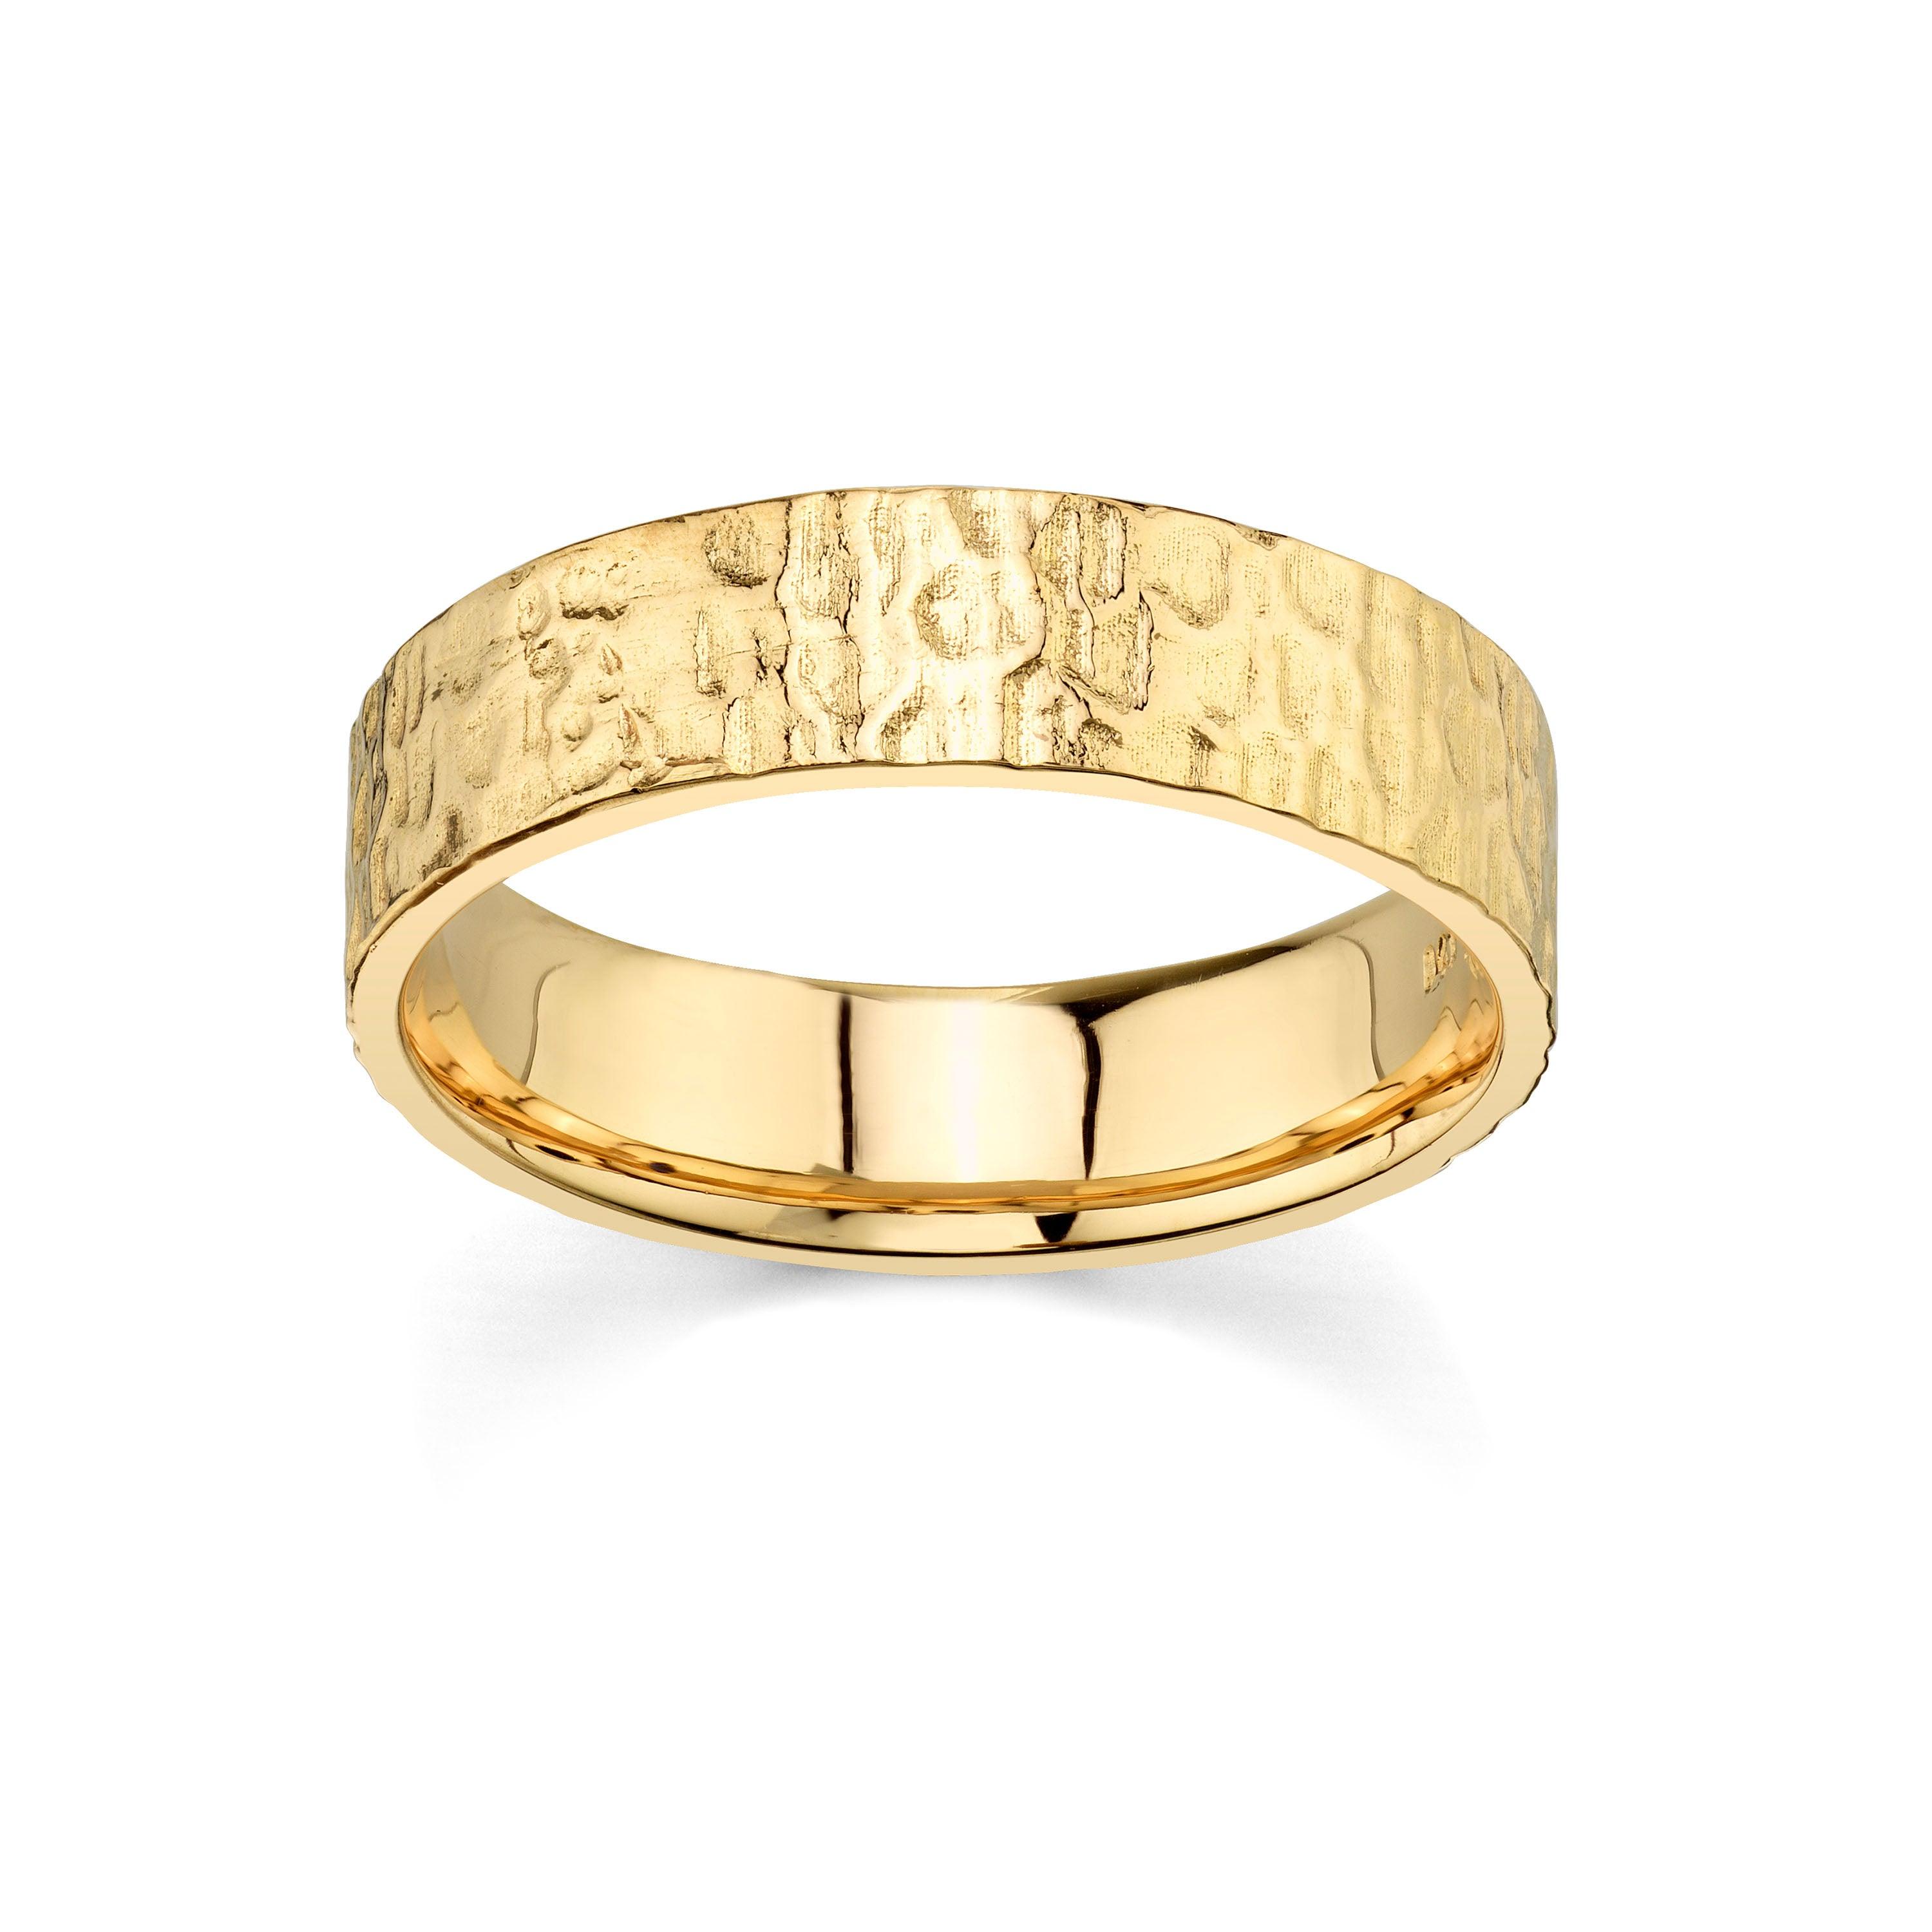 Marrow Fine Jewelry Hammered Metal Gold Men's Wedding Band with Burnished Birthstone Inside